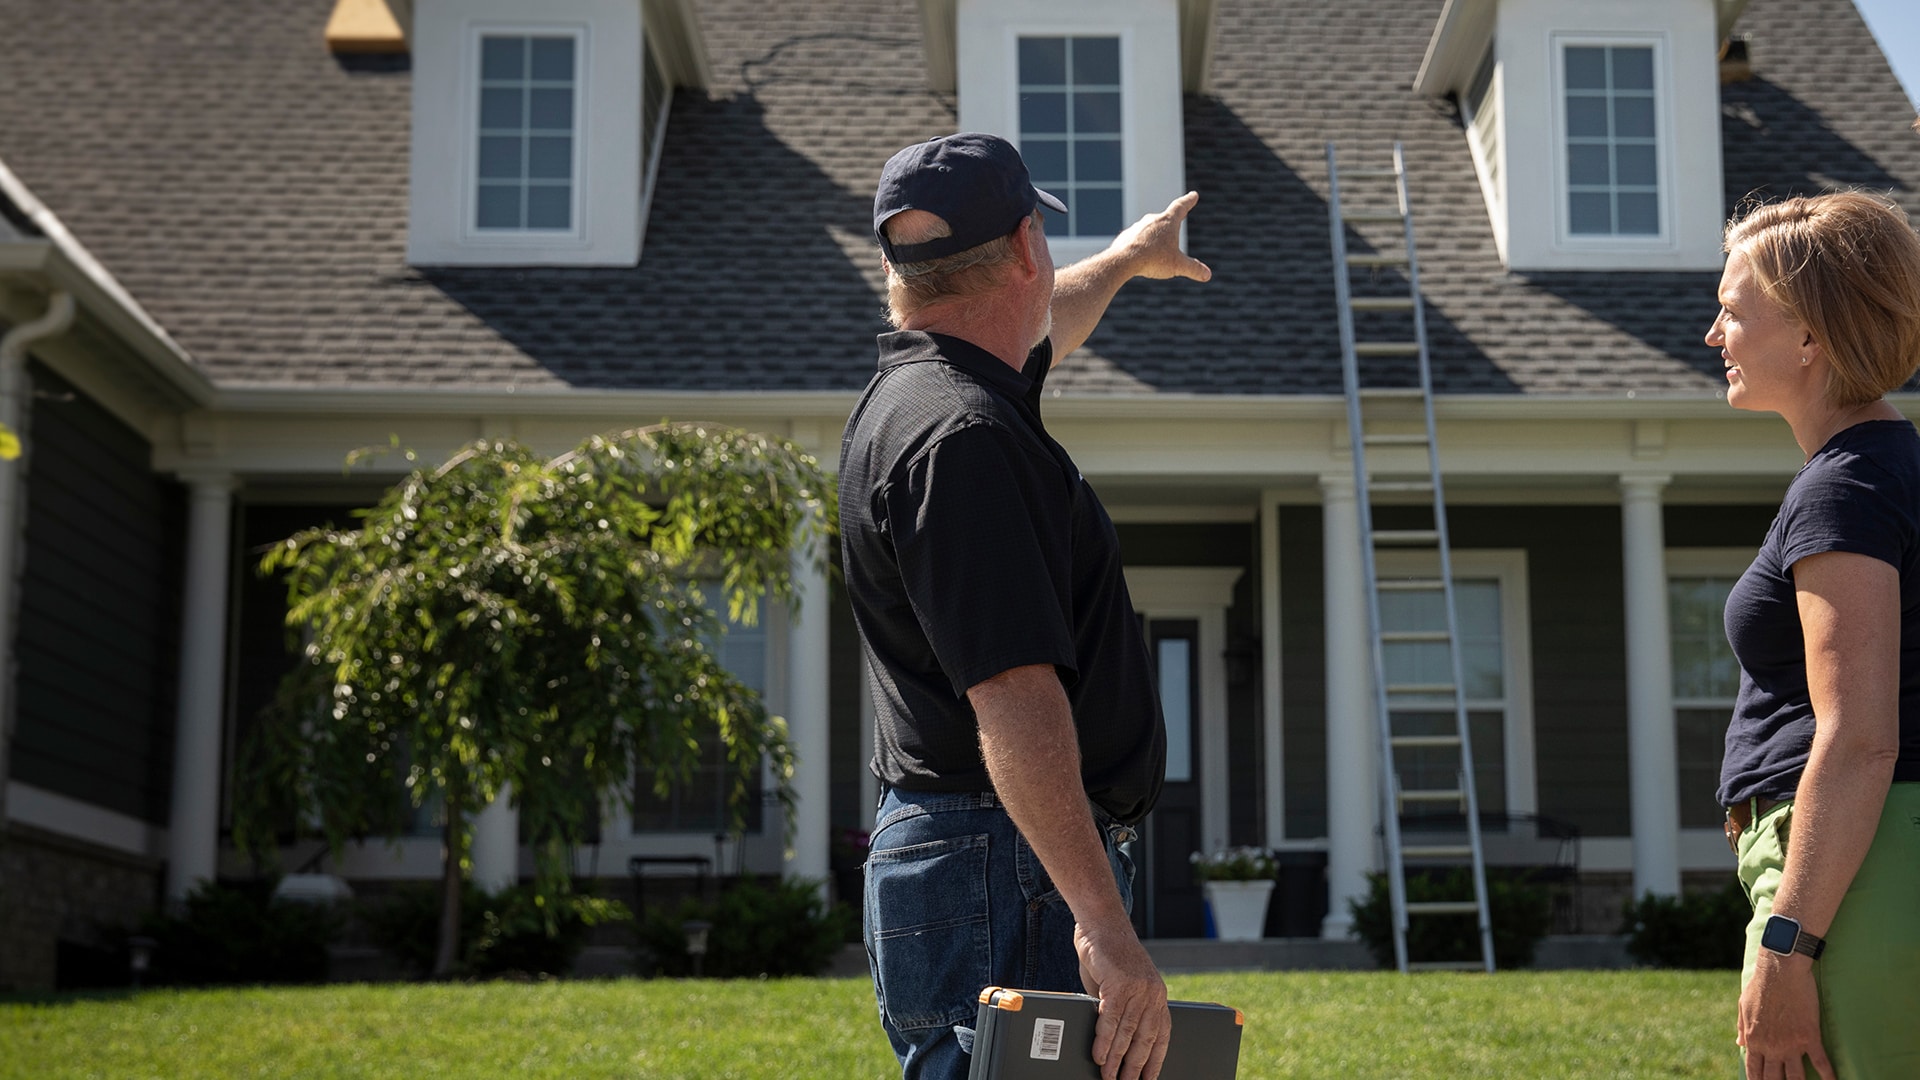 Roofing Contractor working with a homeowner pointing at a roof